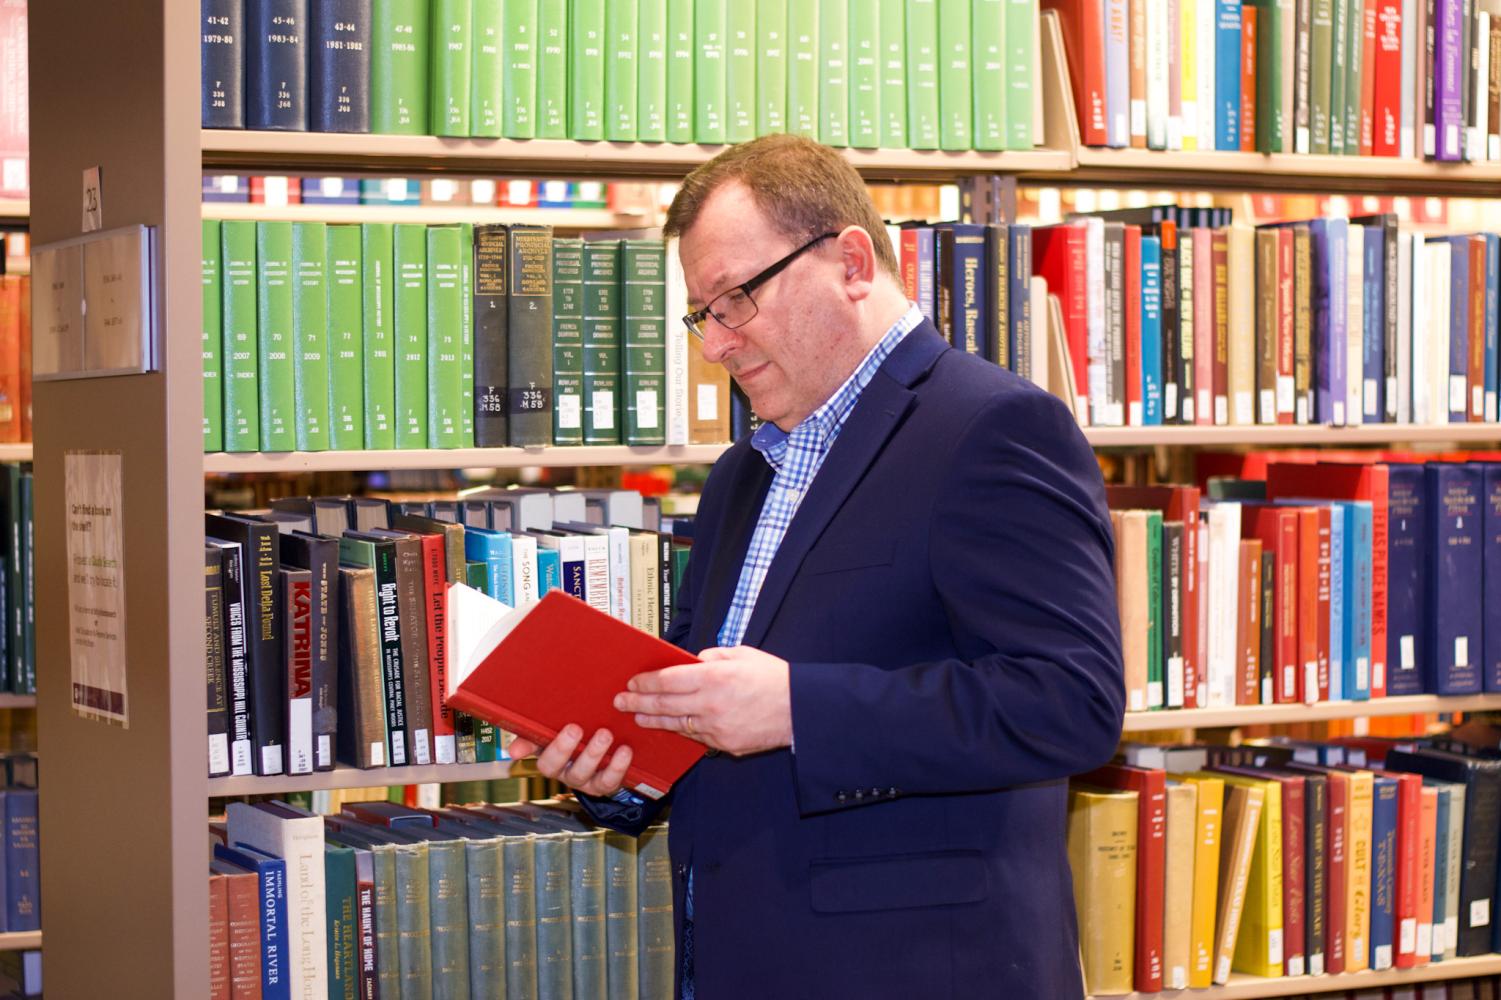 A male wearing glasses, a navy blue blazer and a blue shirt holds a red book with his hands. Behind him is a bookshelf with multiple rows of books with red, green, blue, black and brown covers.